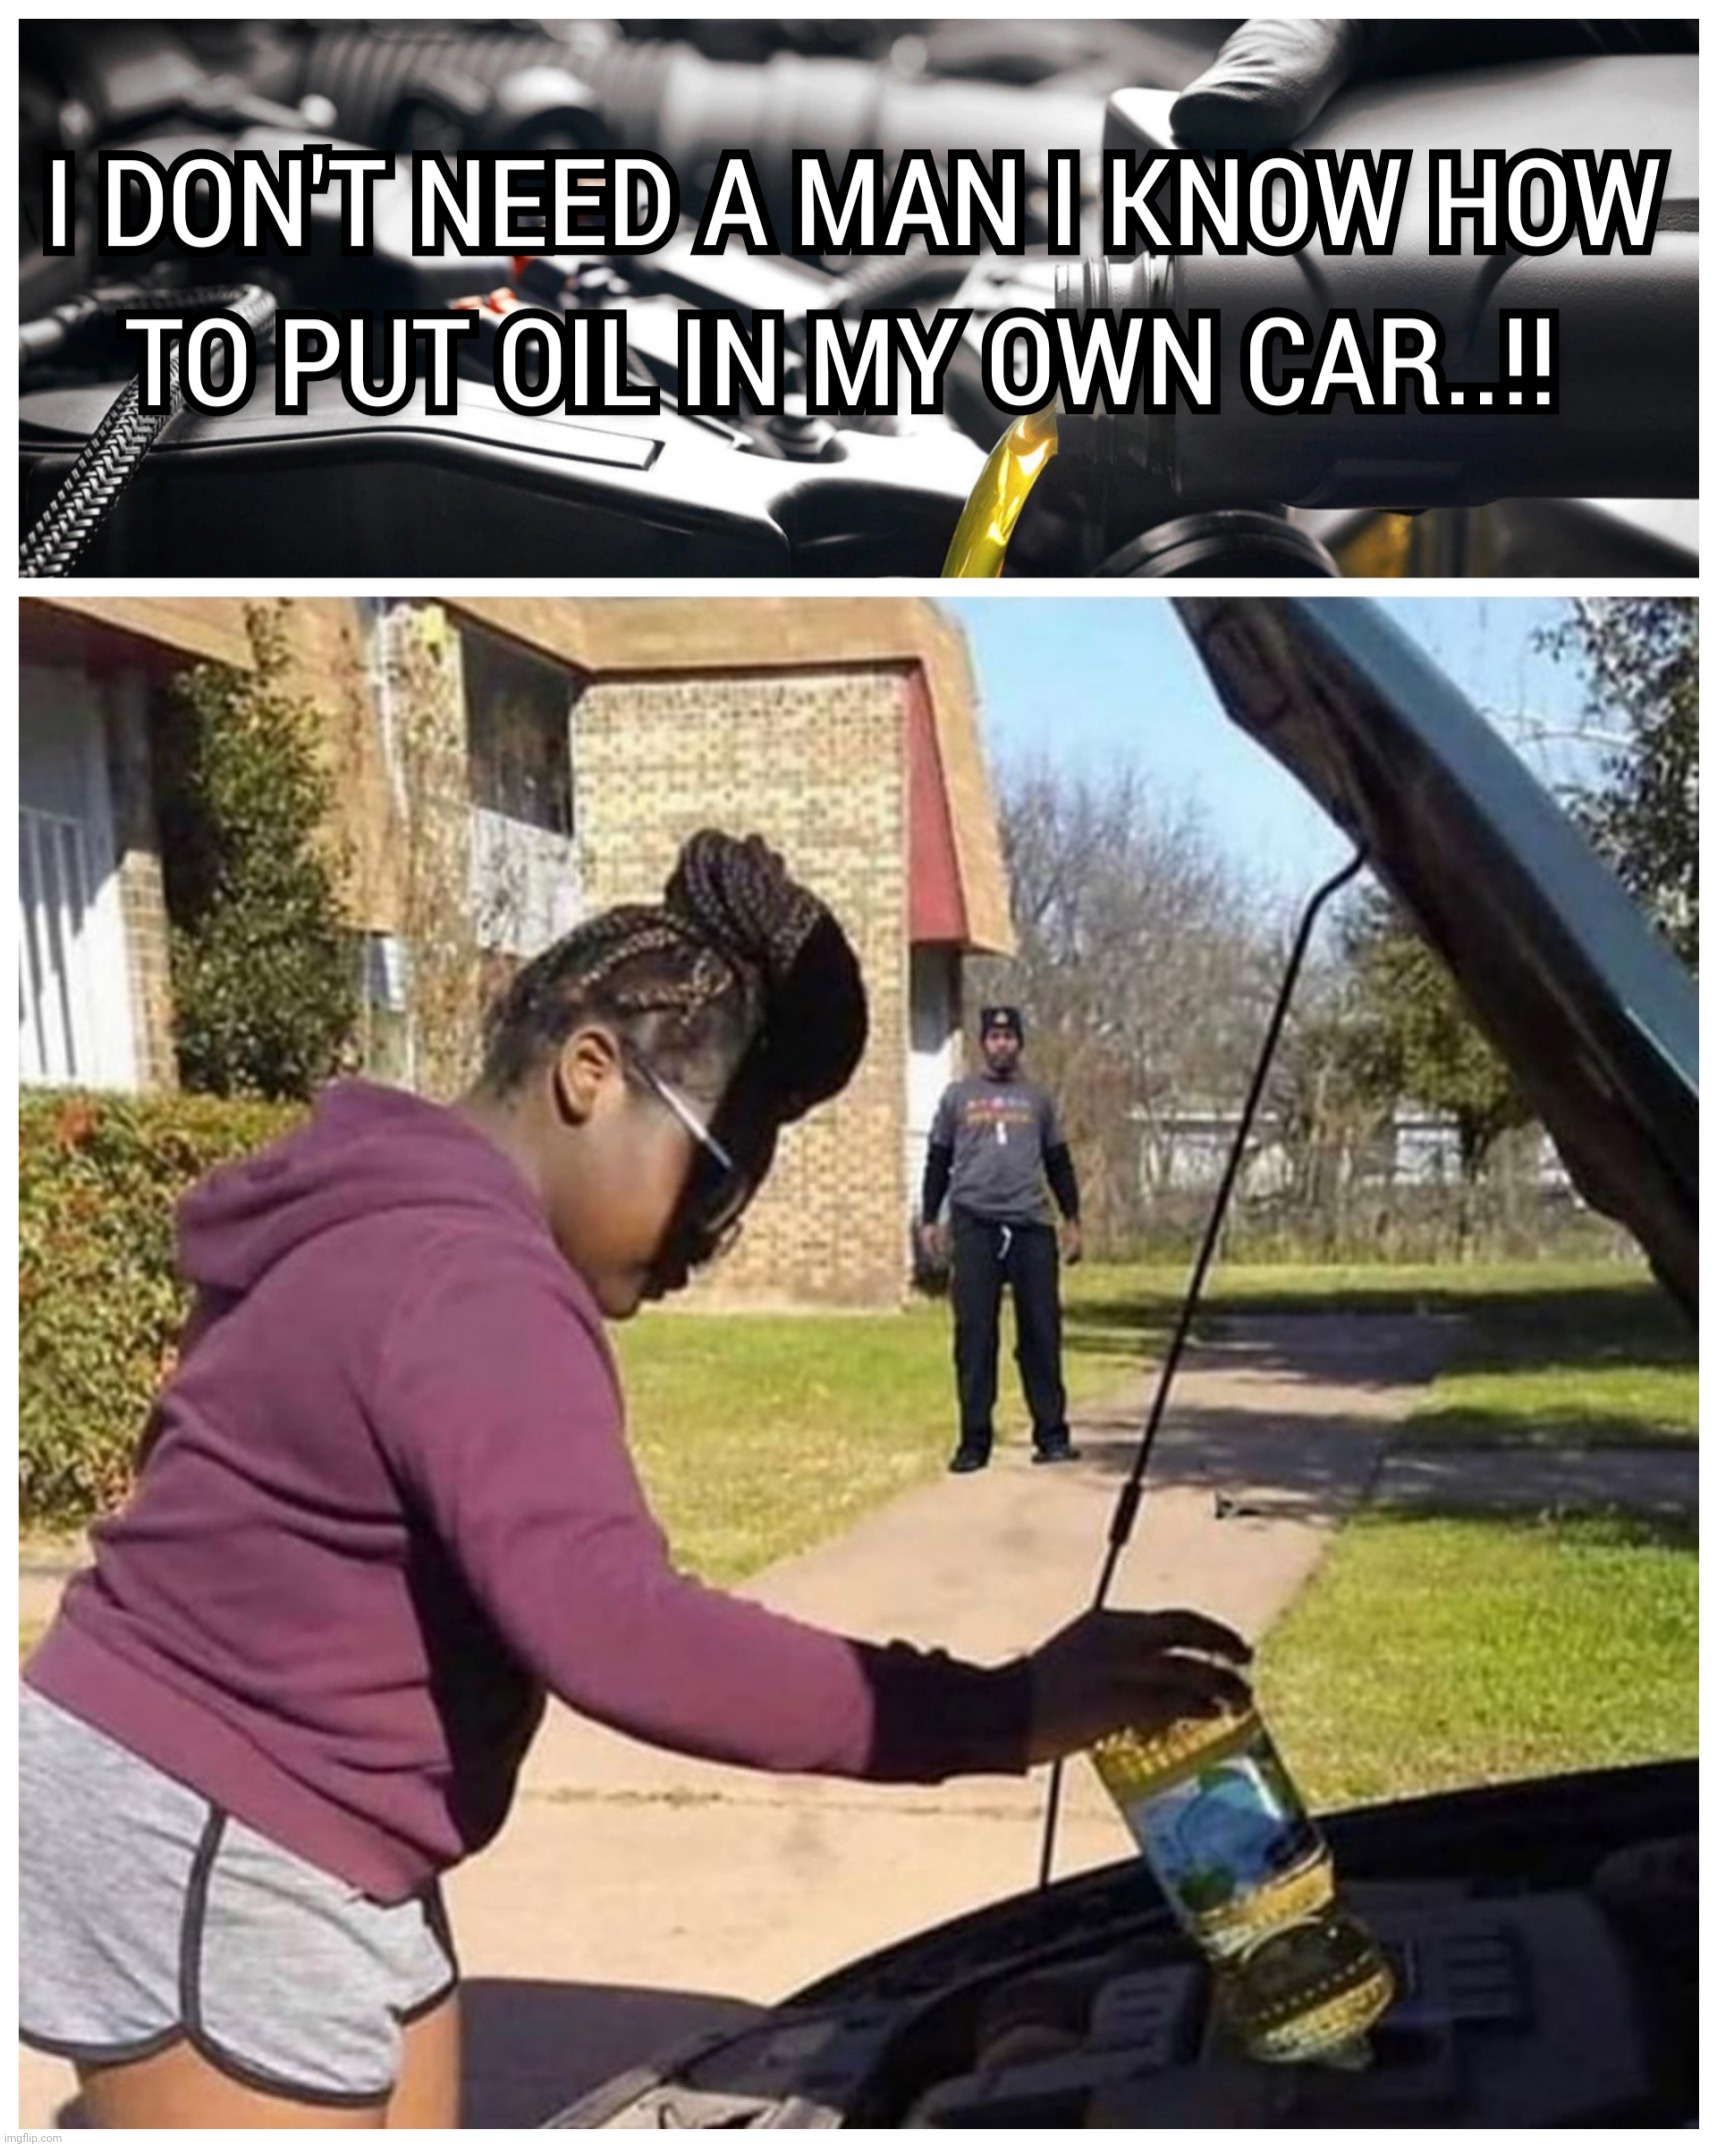 I DON'T NEED A MAN I KNOW HOW TO PUT OIL IN MY CAR..!! | image tagged in oil change,oil,stupidity,woman vs man,car,memes | made w/ Imgflip meme maker